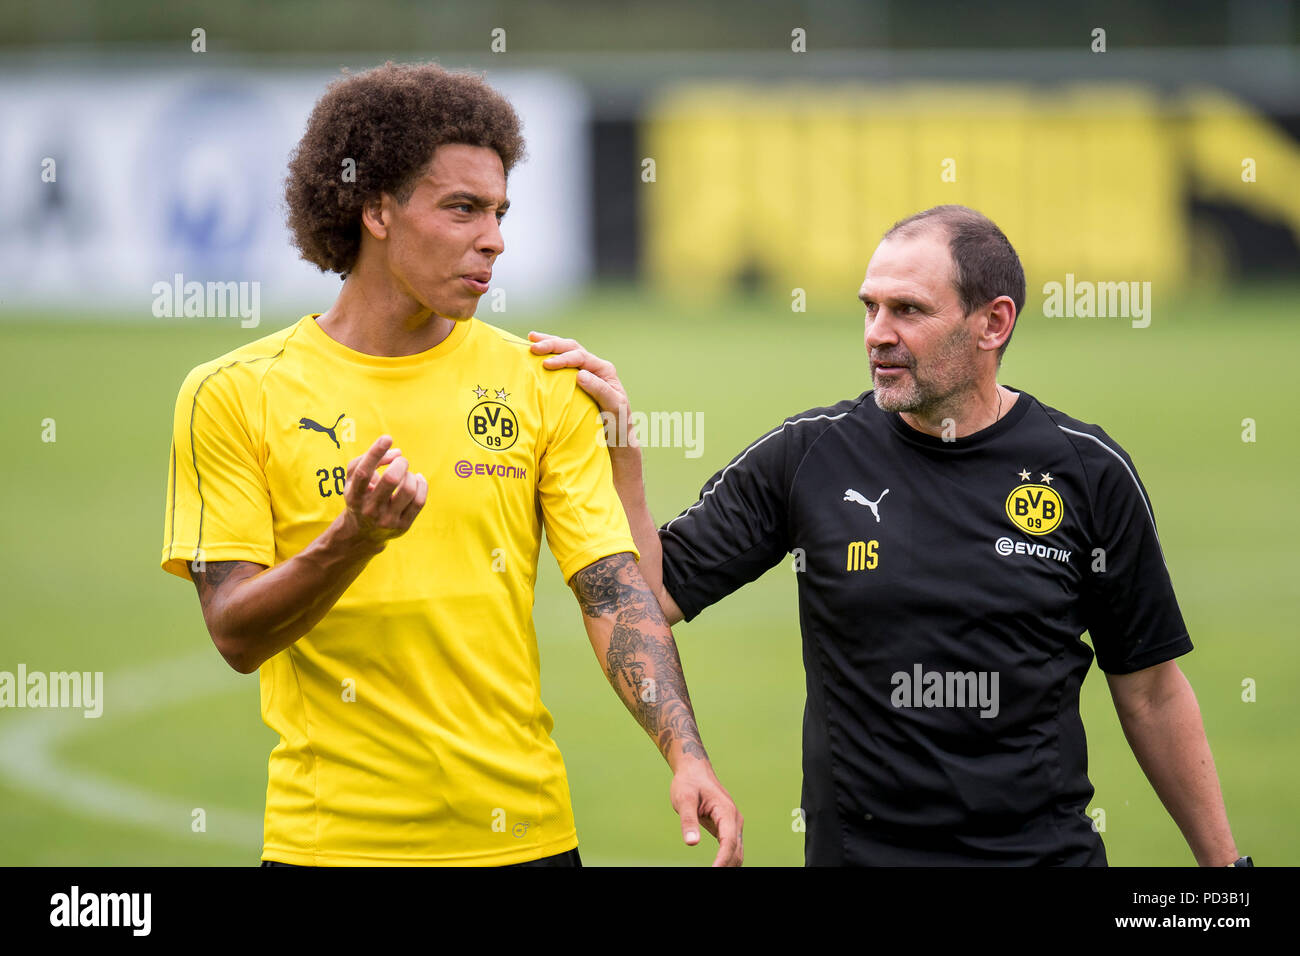 06 August 2018, Switzerland, Bad Ragaz: Football, training camp of team  Borussia Dortmund. Newcomer Axel Witsel (l) talks during training with  co-trainer Manfred Stefes. Photo: David Inderlied/dpa Stock Photo - Alamy